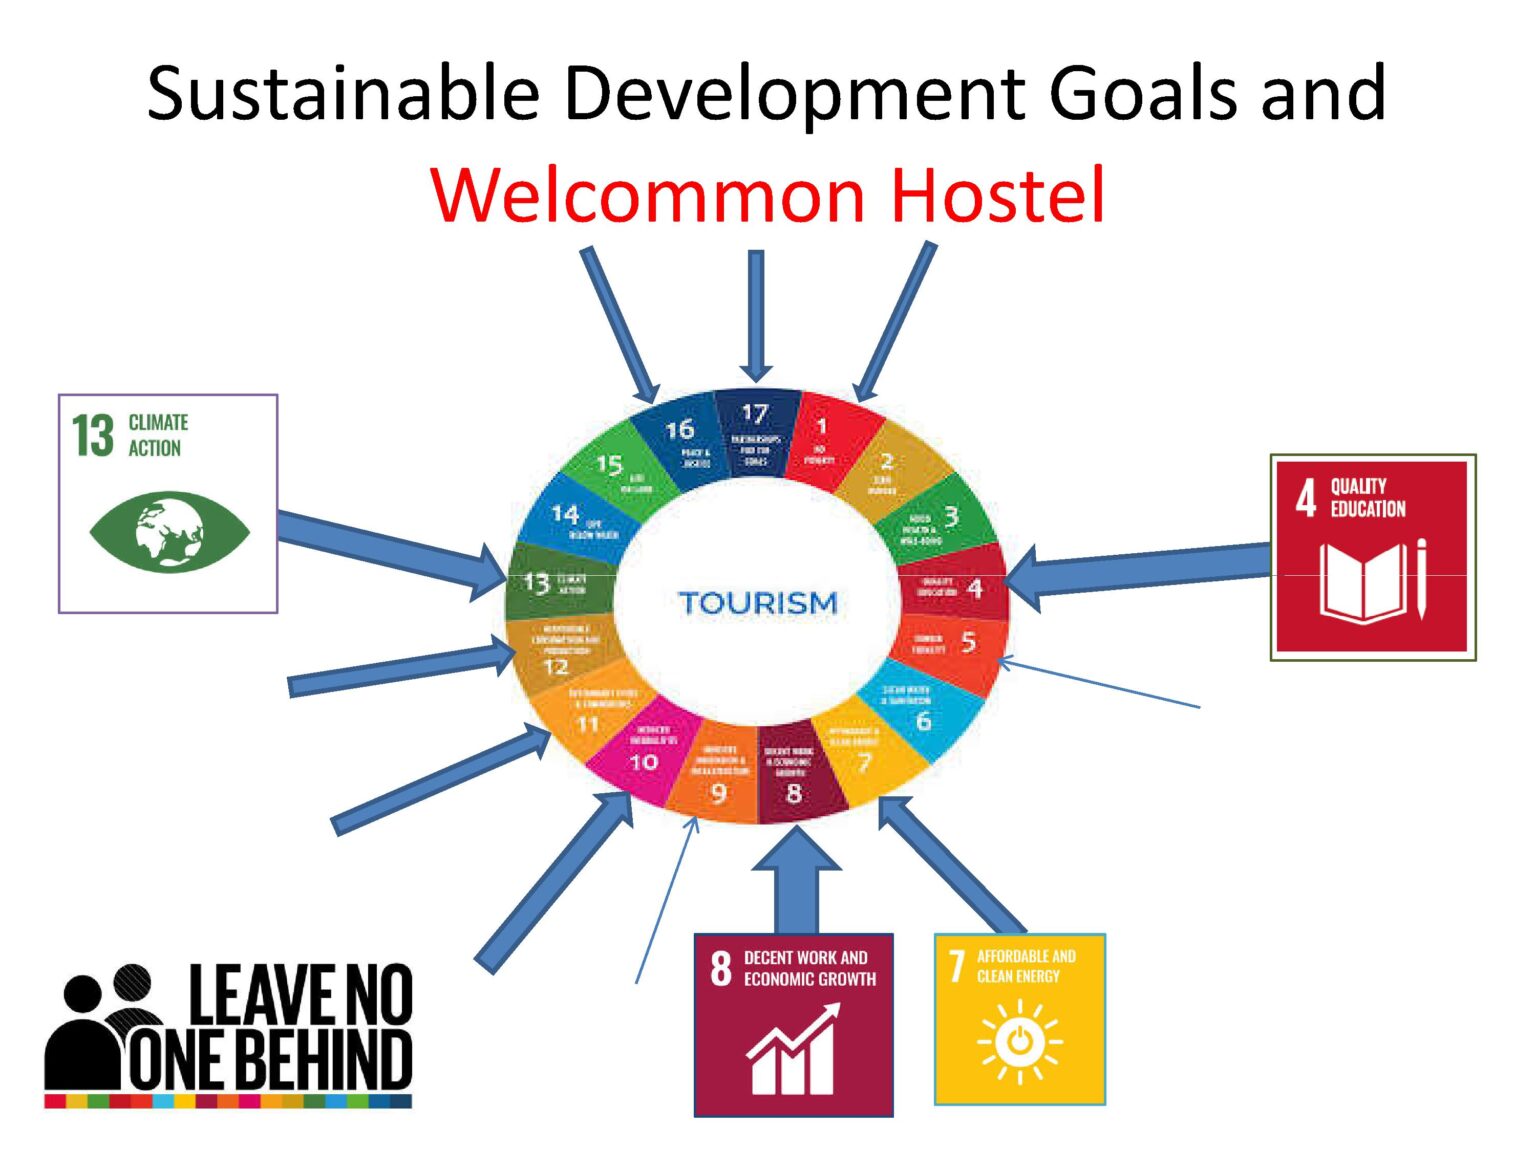 Anemos Ananeosis / Wind of Renewal, Welcommon Hostel and our efforts for promoting sustainable Development Goals (SDG)